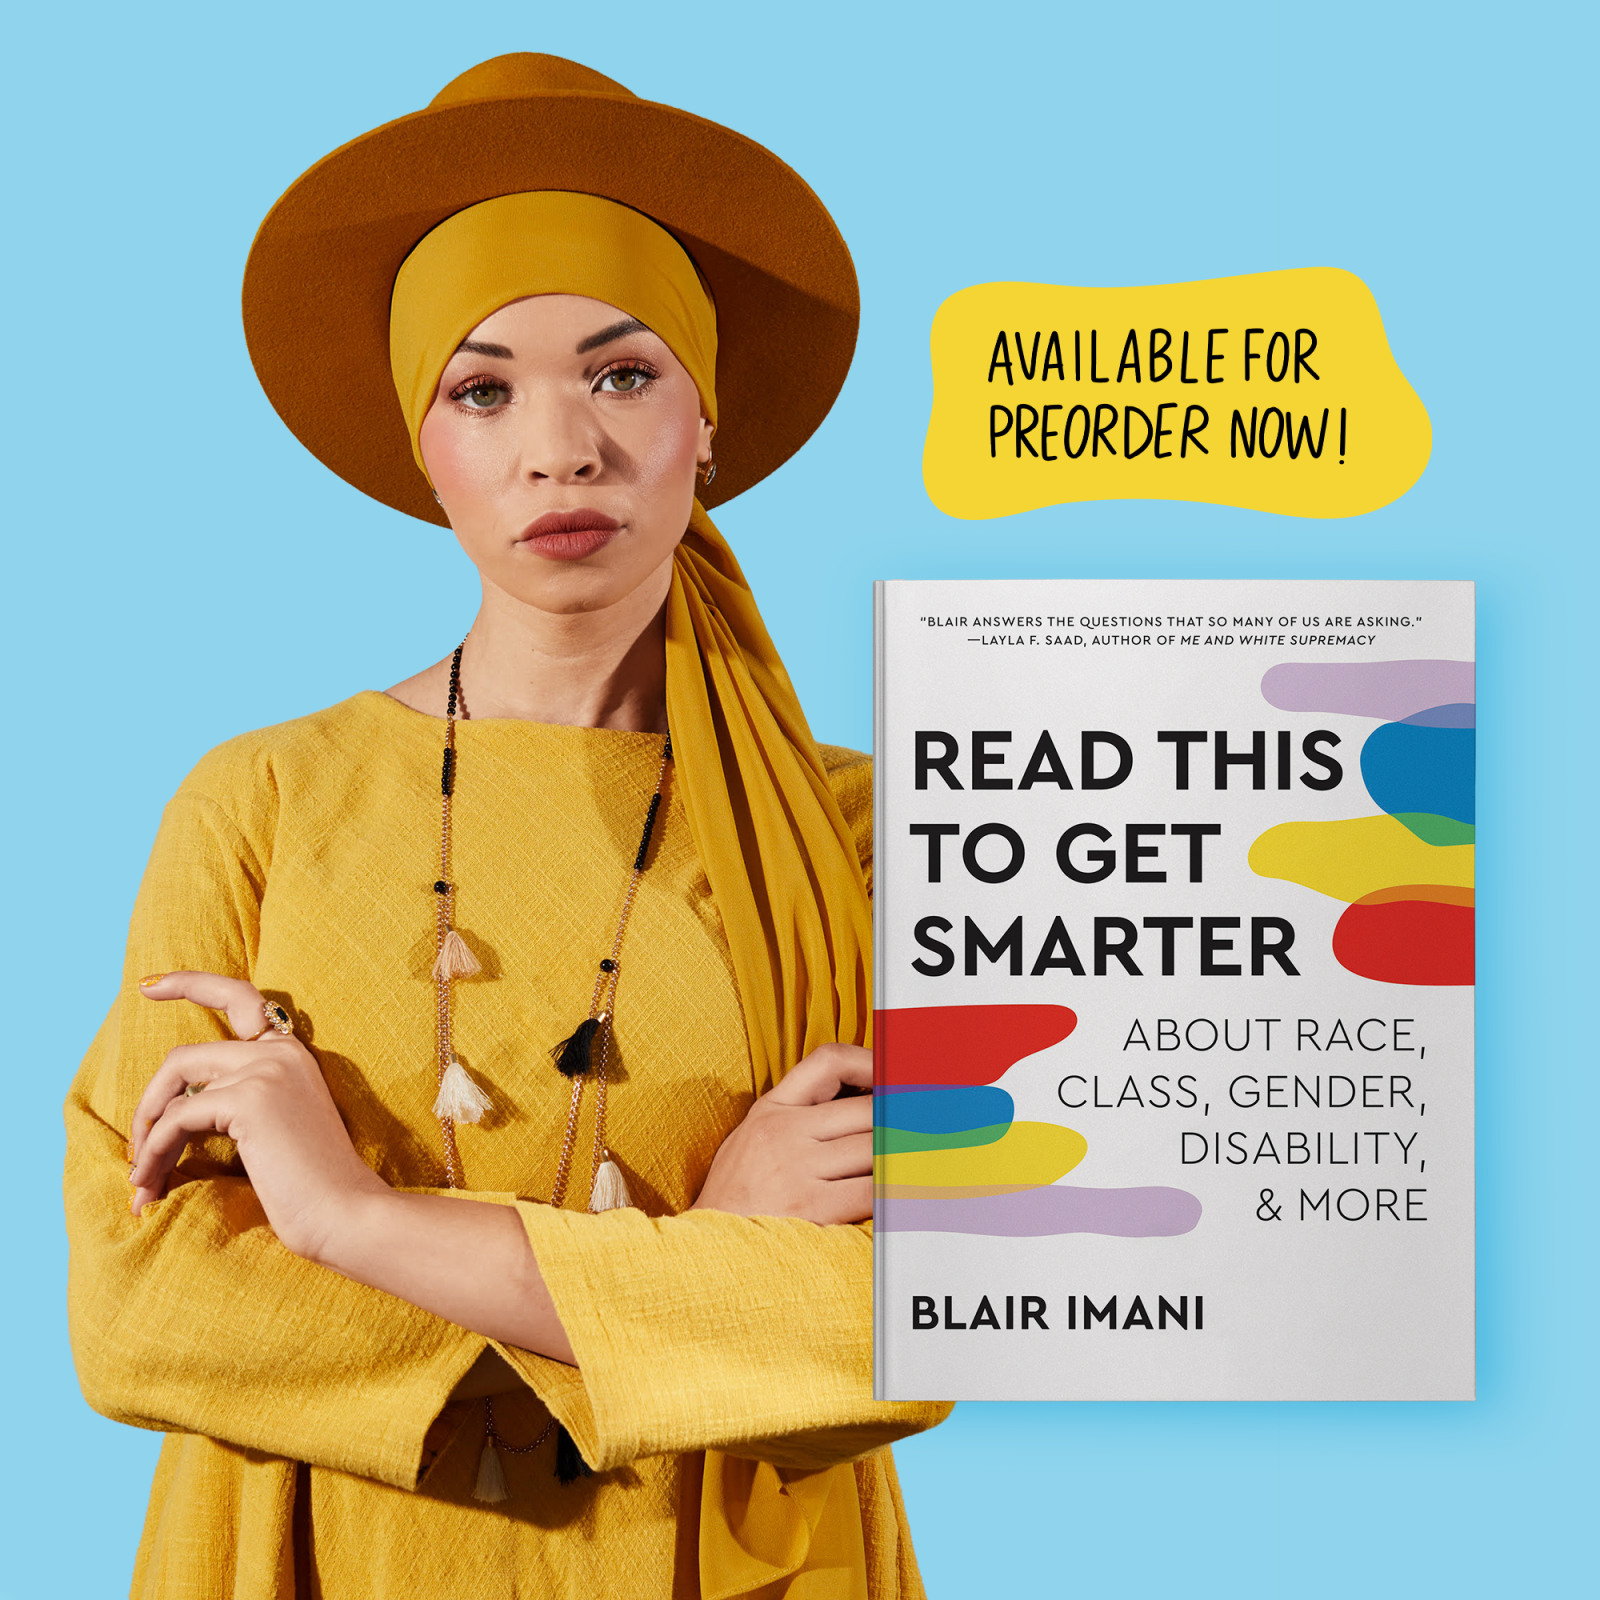 EXCLUSIVE: Blair Imani Reveals Cover Art For Her New Book, ‘Read This To Get Smarter’